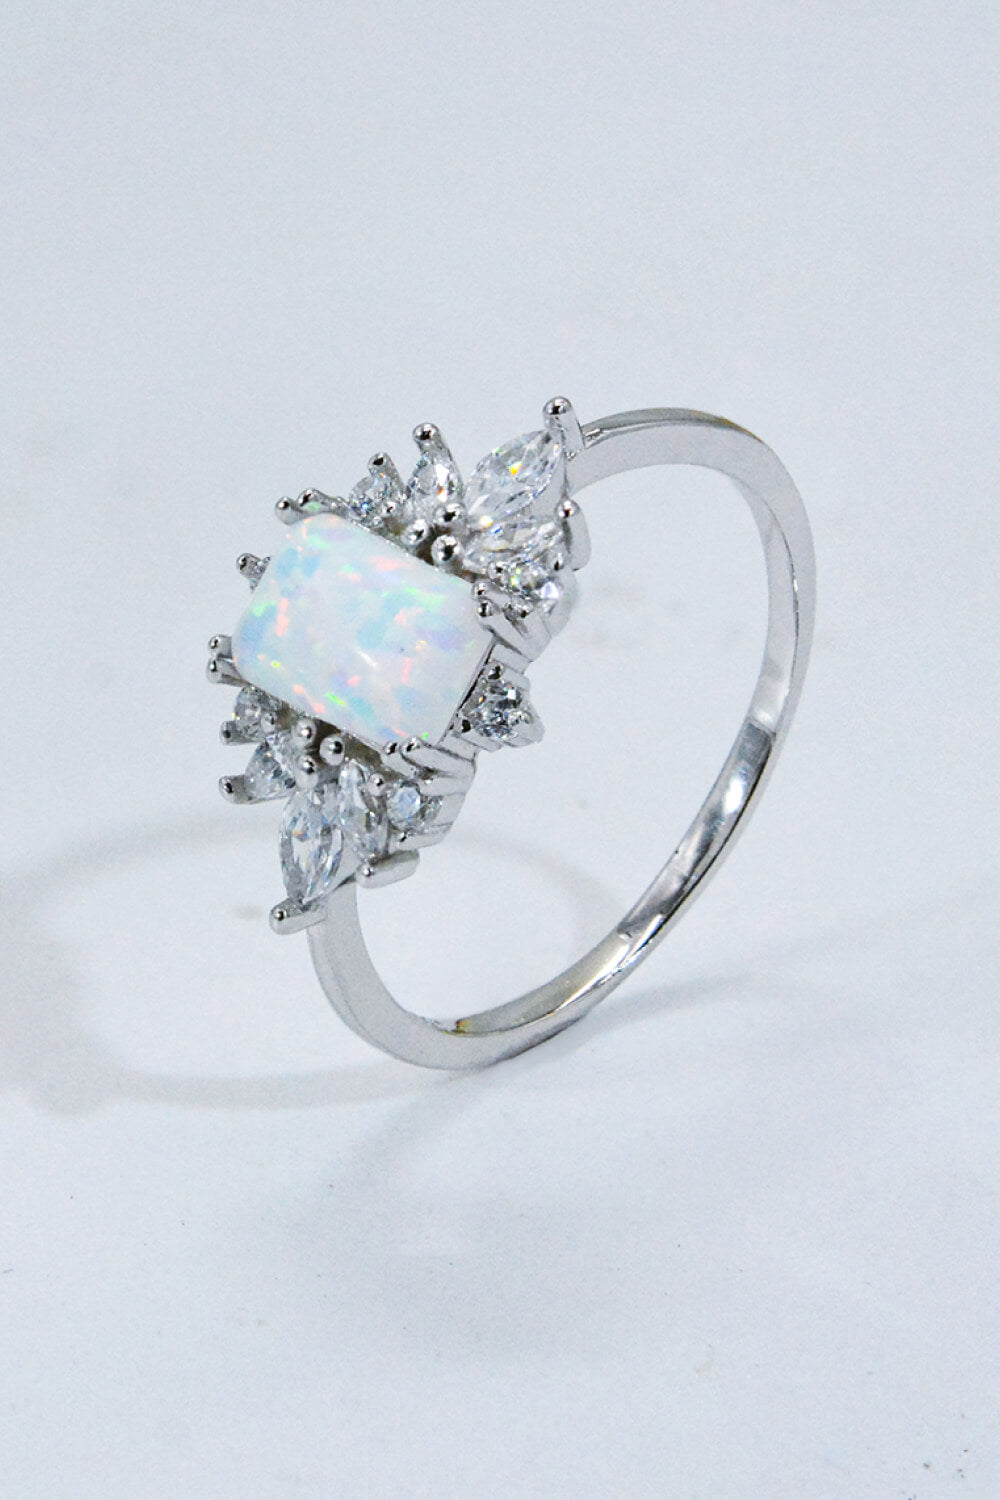 Women's 925 Sterling Silver Zircon and Opal Ring